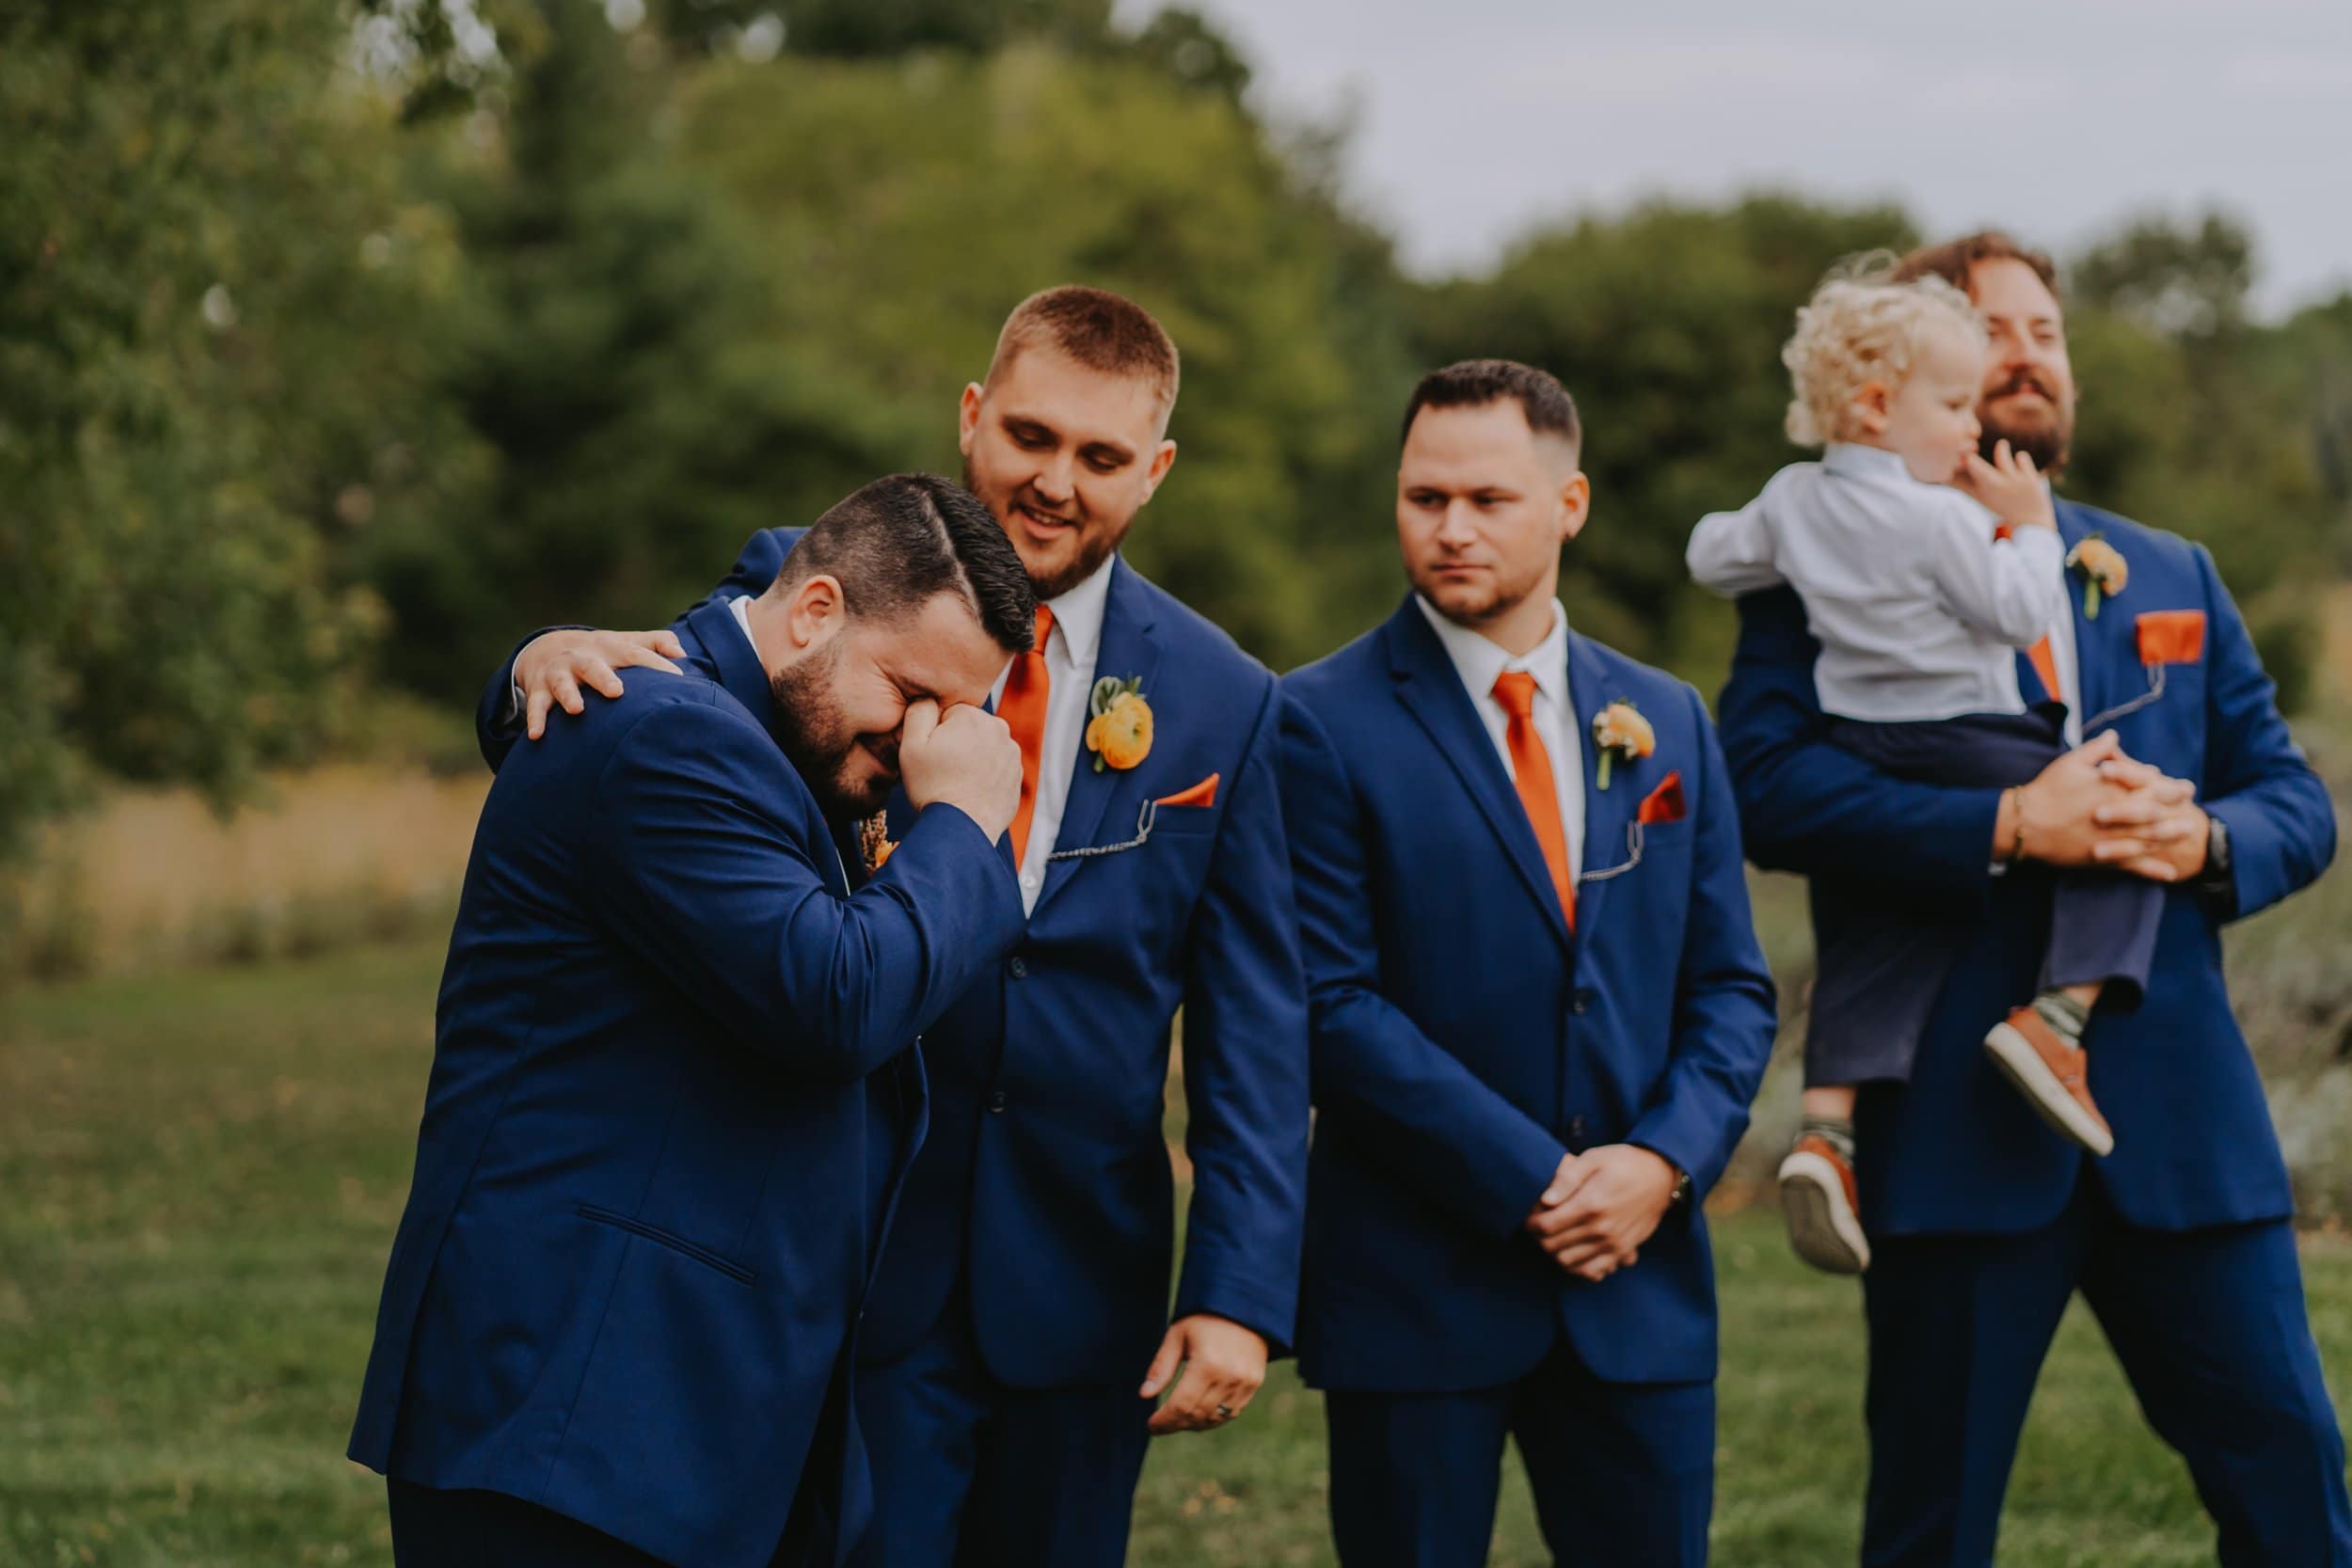 Wedding photography. The groom is holding back tears and his best man is comforting him